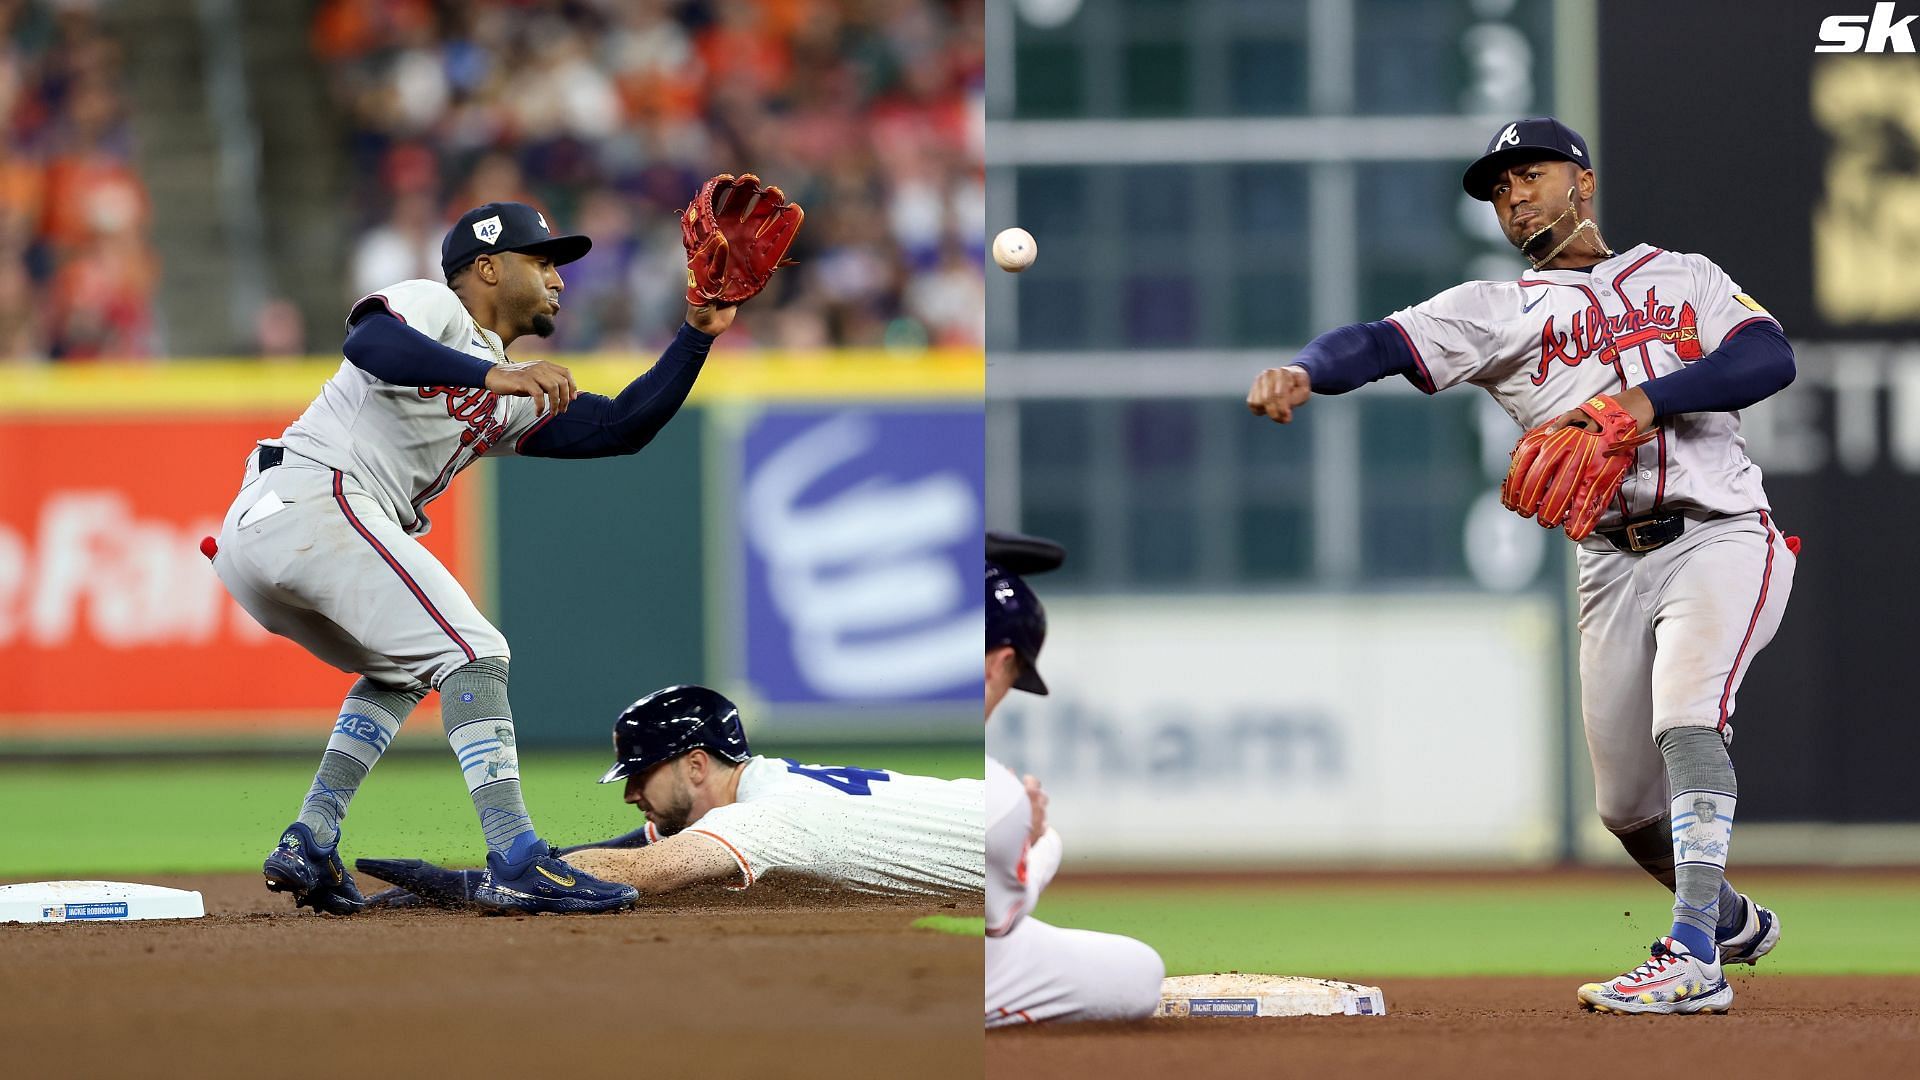 Ozzie Albies of the Atlanta Braves forces Alex Bregman of the Houston Astros out at second and throws to first in the sixth inning at Minute Maid Park